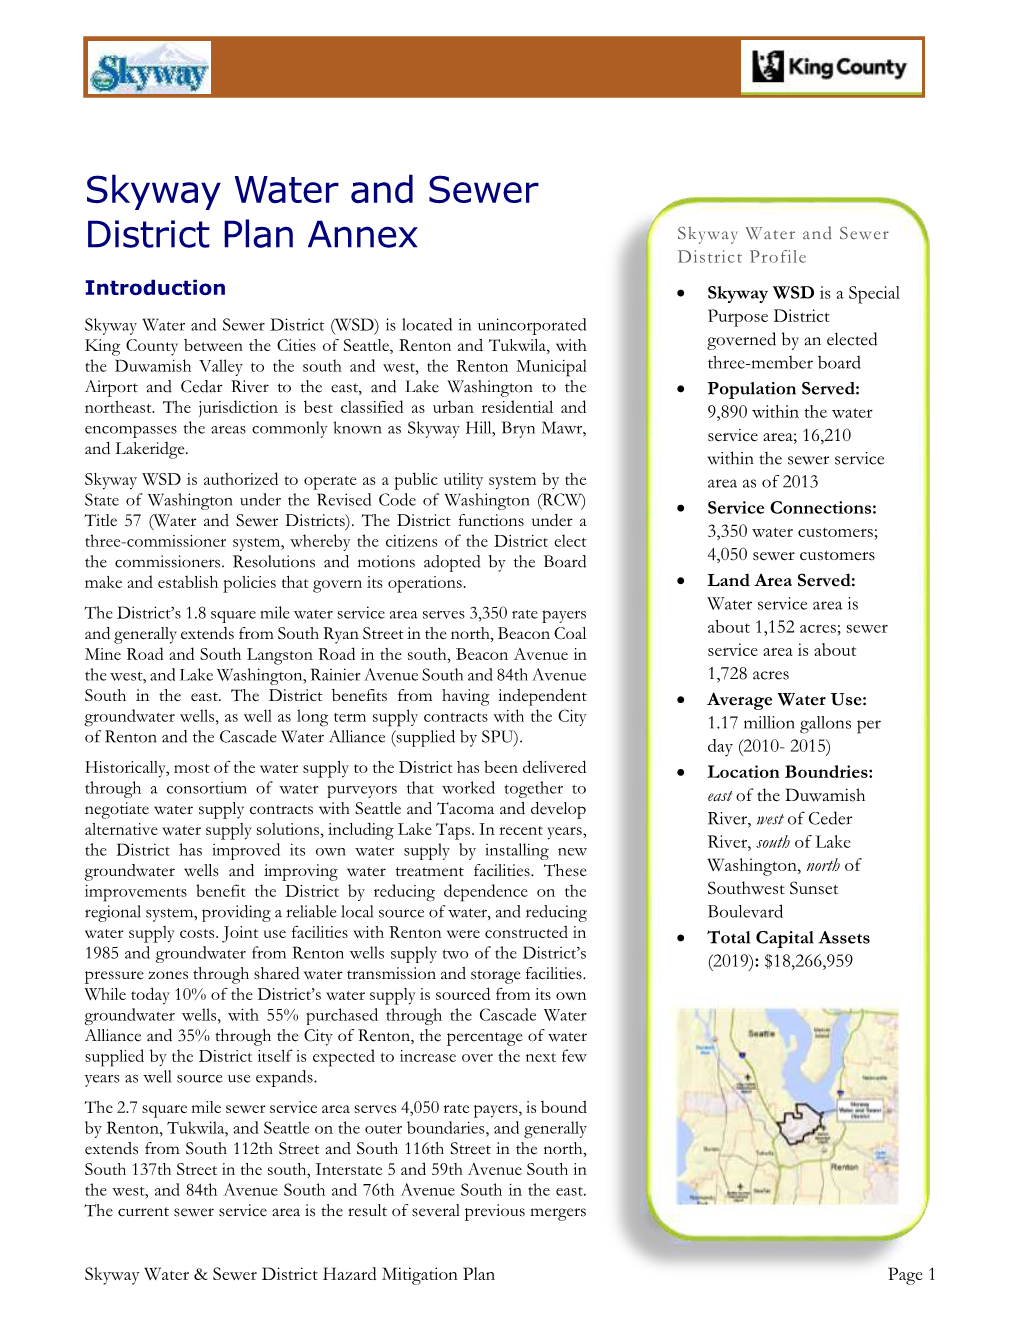 Skyway Water and Sewer District Plan Annex